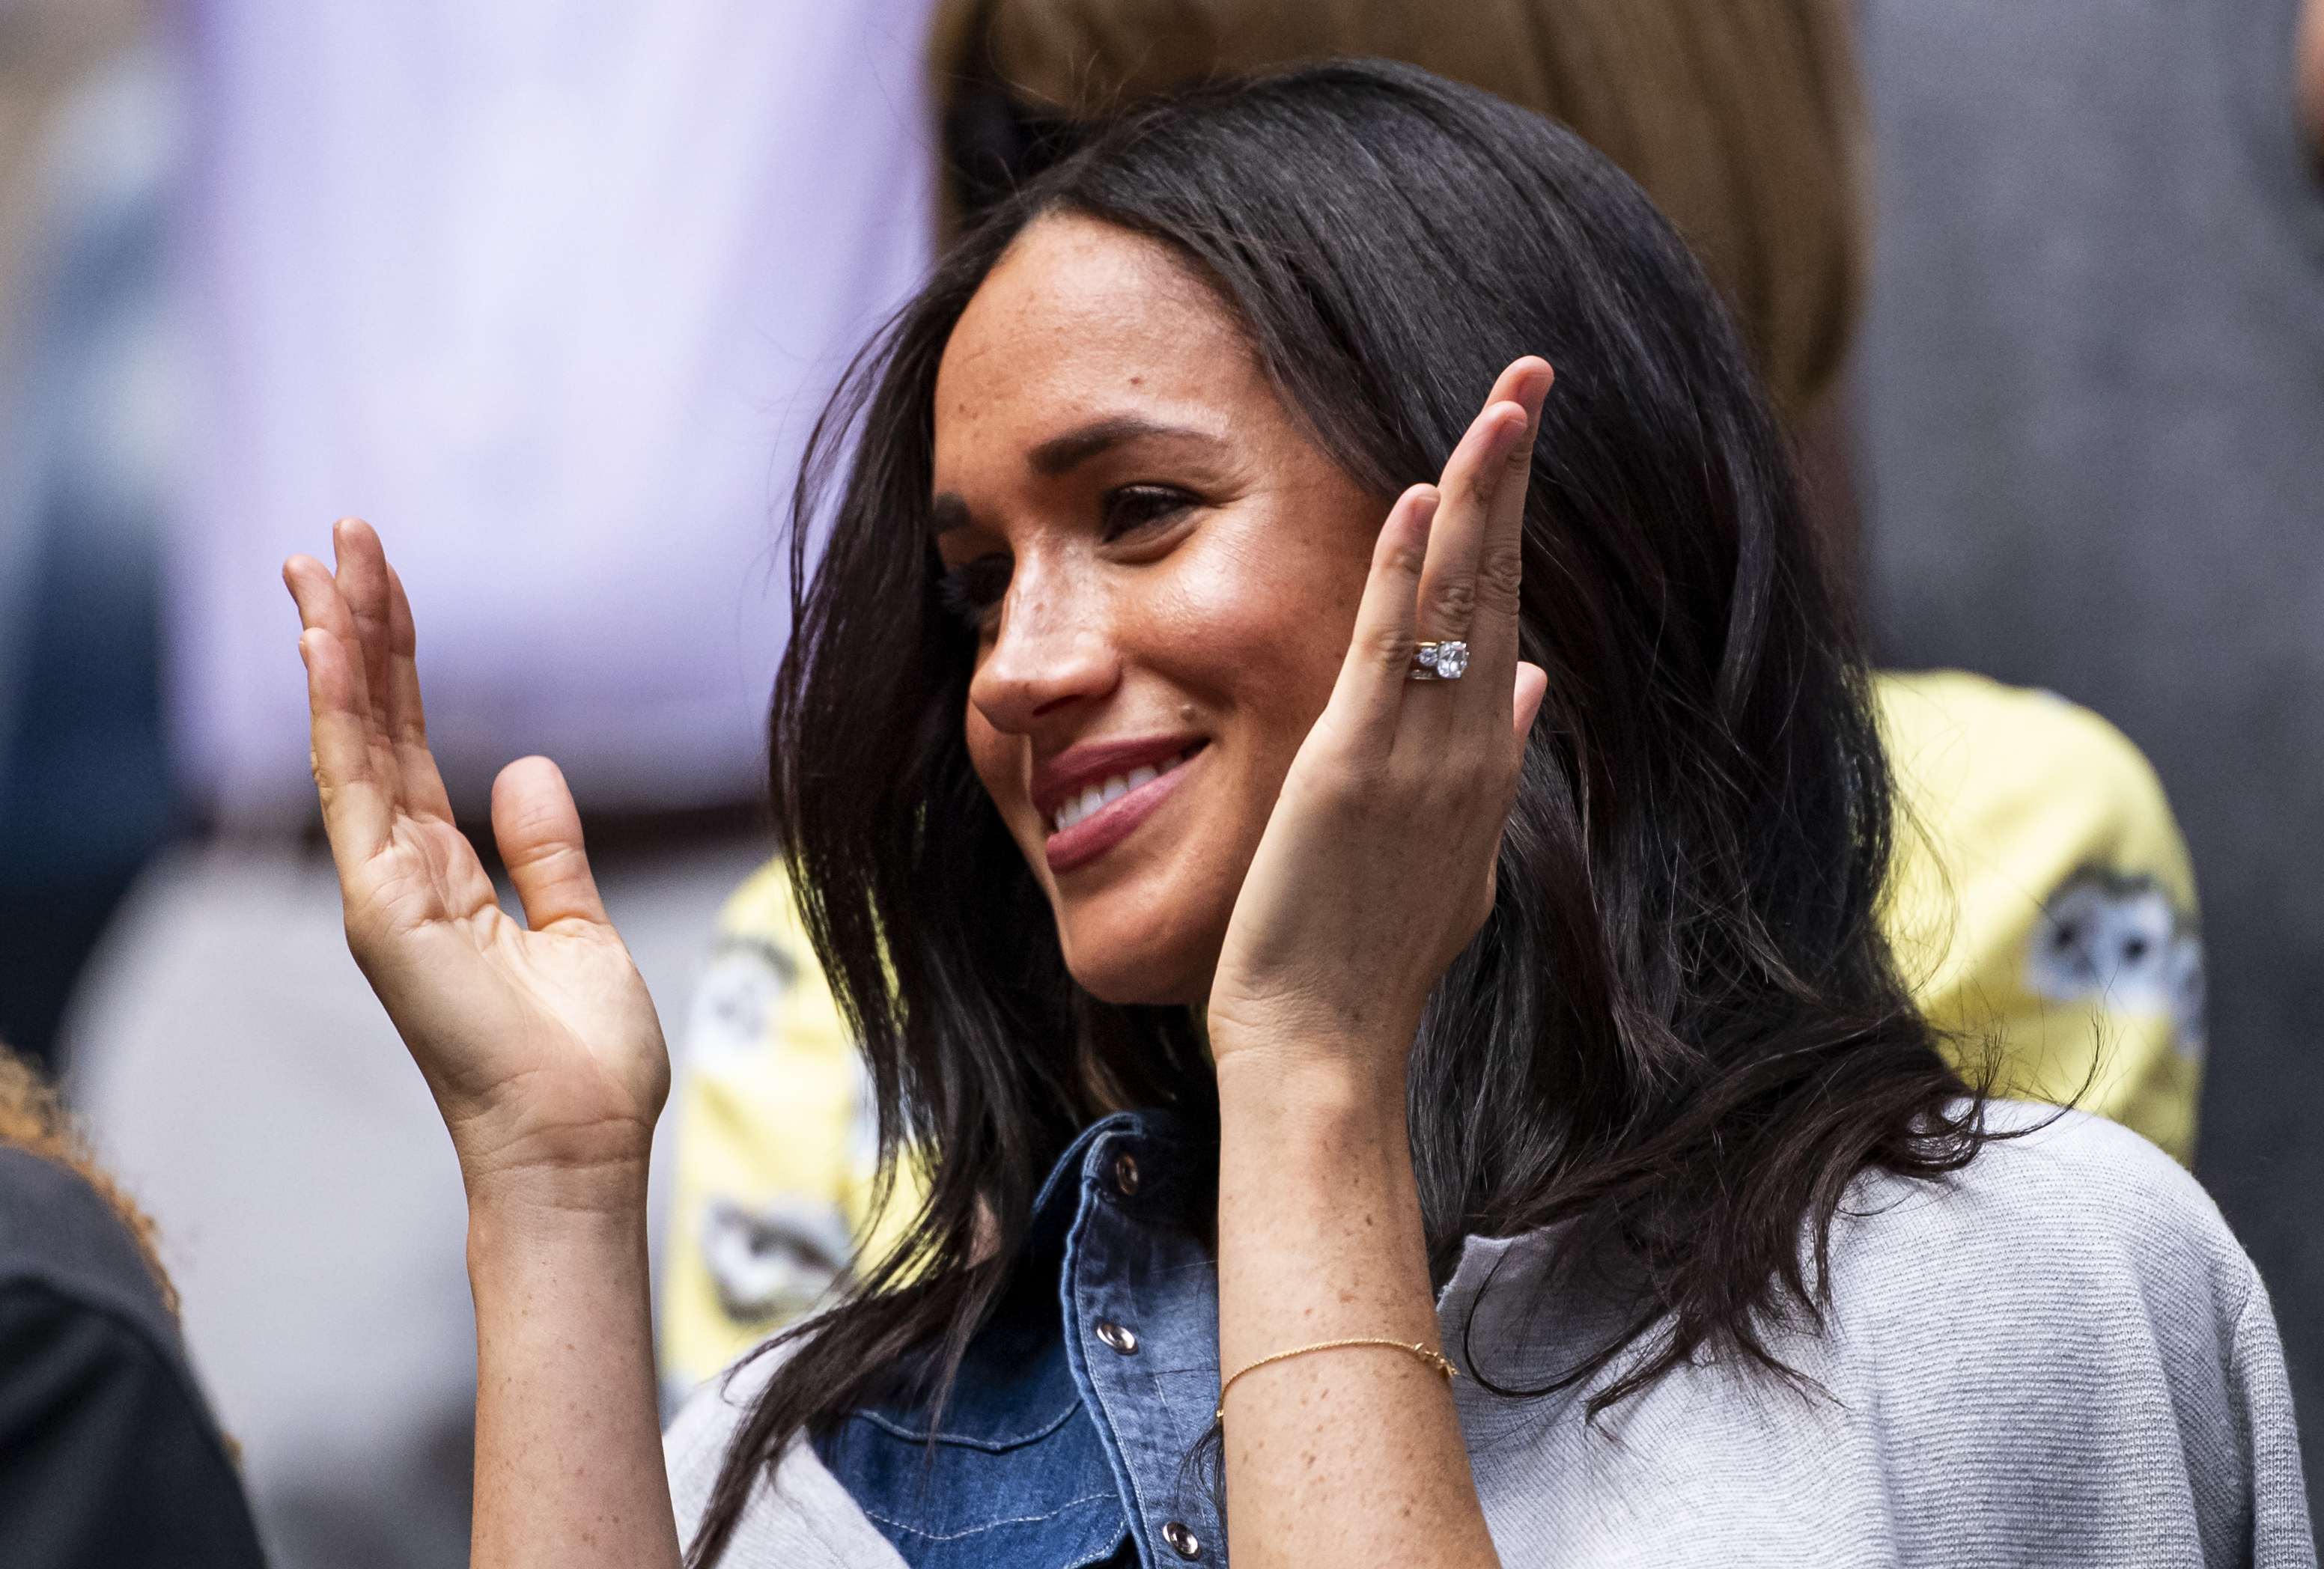  Megan, The Duchess of Sussex, watches Serena Williams of the United States in action against Bianca Andreescu of Canada at Arthur Ashe Stadium at the USTA Billie Jean King National Tennis Center on September 07, 2019 in New York City. Image: TPN / Getty Images